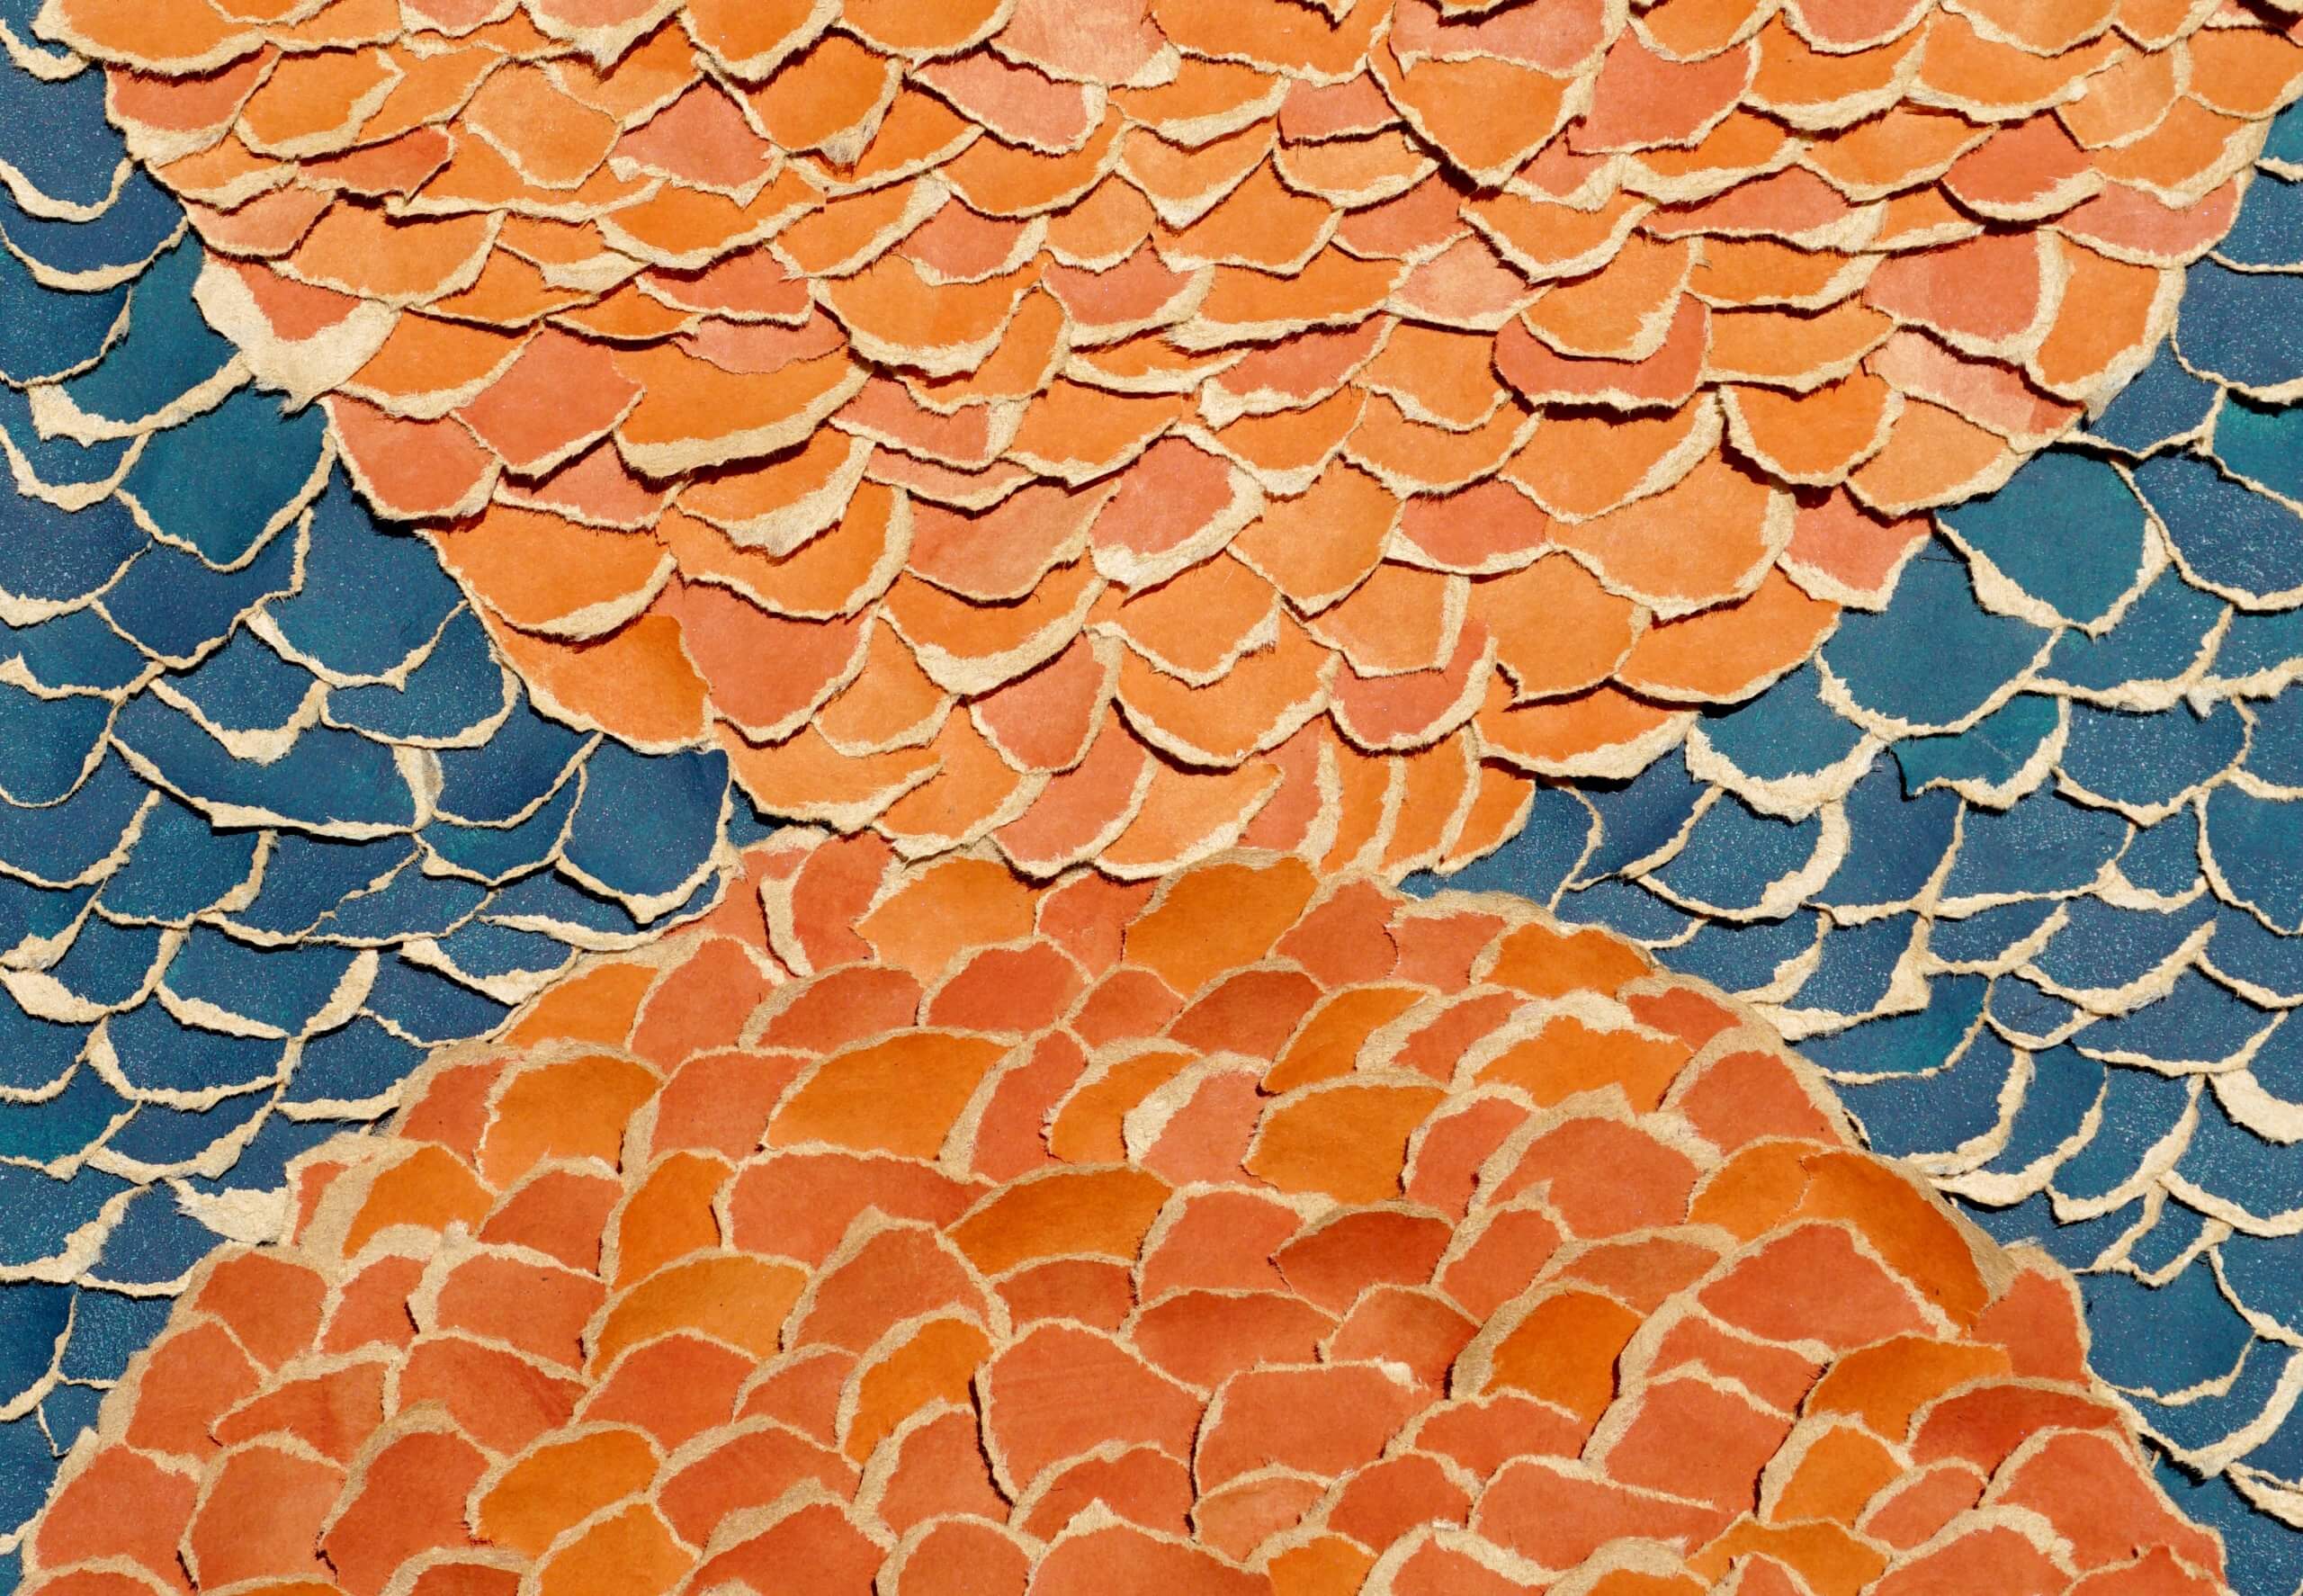 An abstract torn paper collage - orange paper torn into small circles is arranged to resemble fish scales, forming two semi-circles that meet in the center. Blue torn paper circles fill the gap behind the orange.